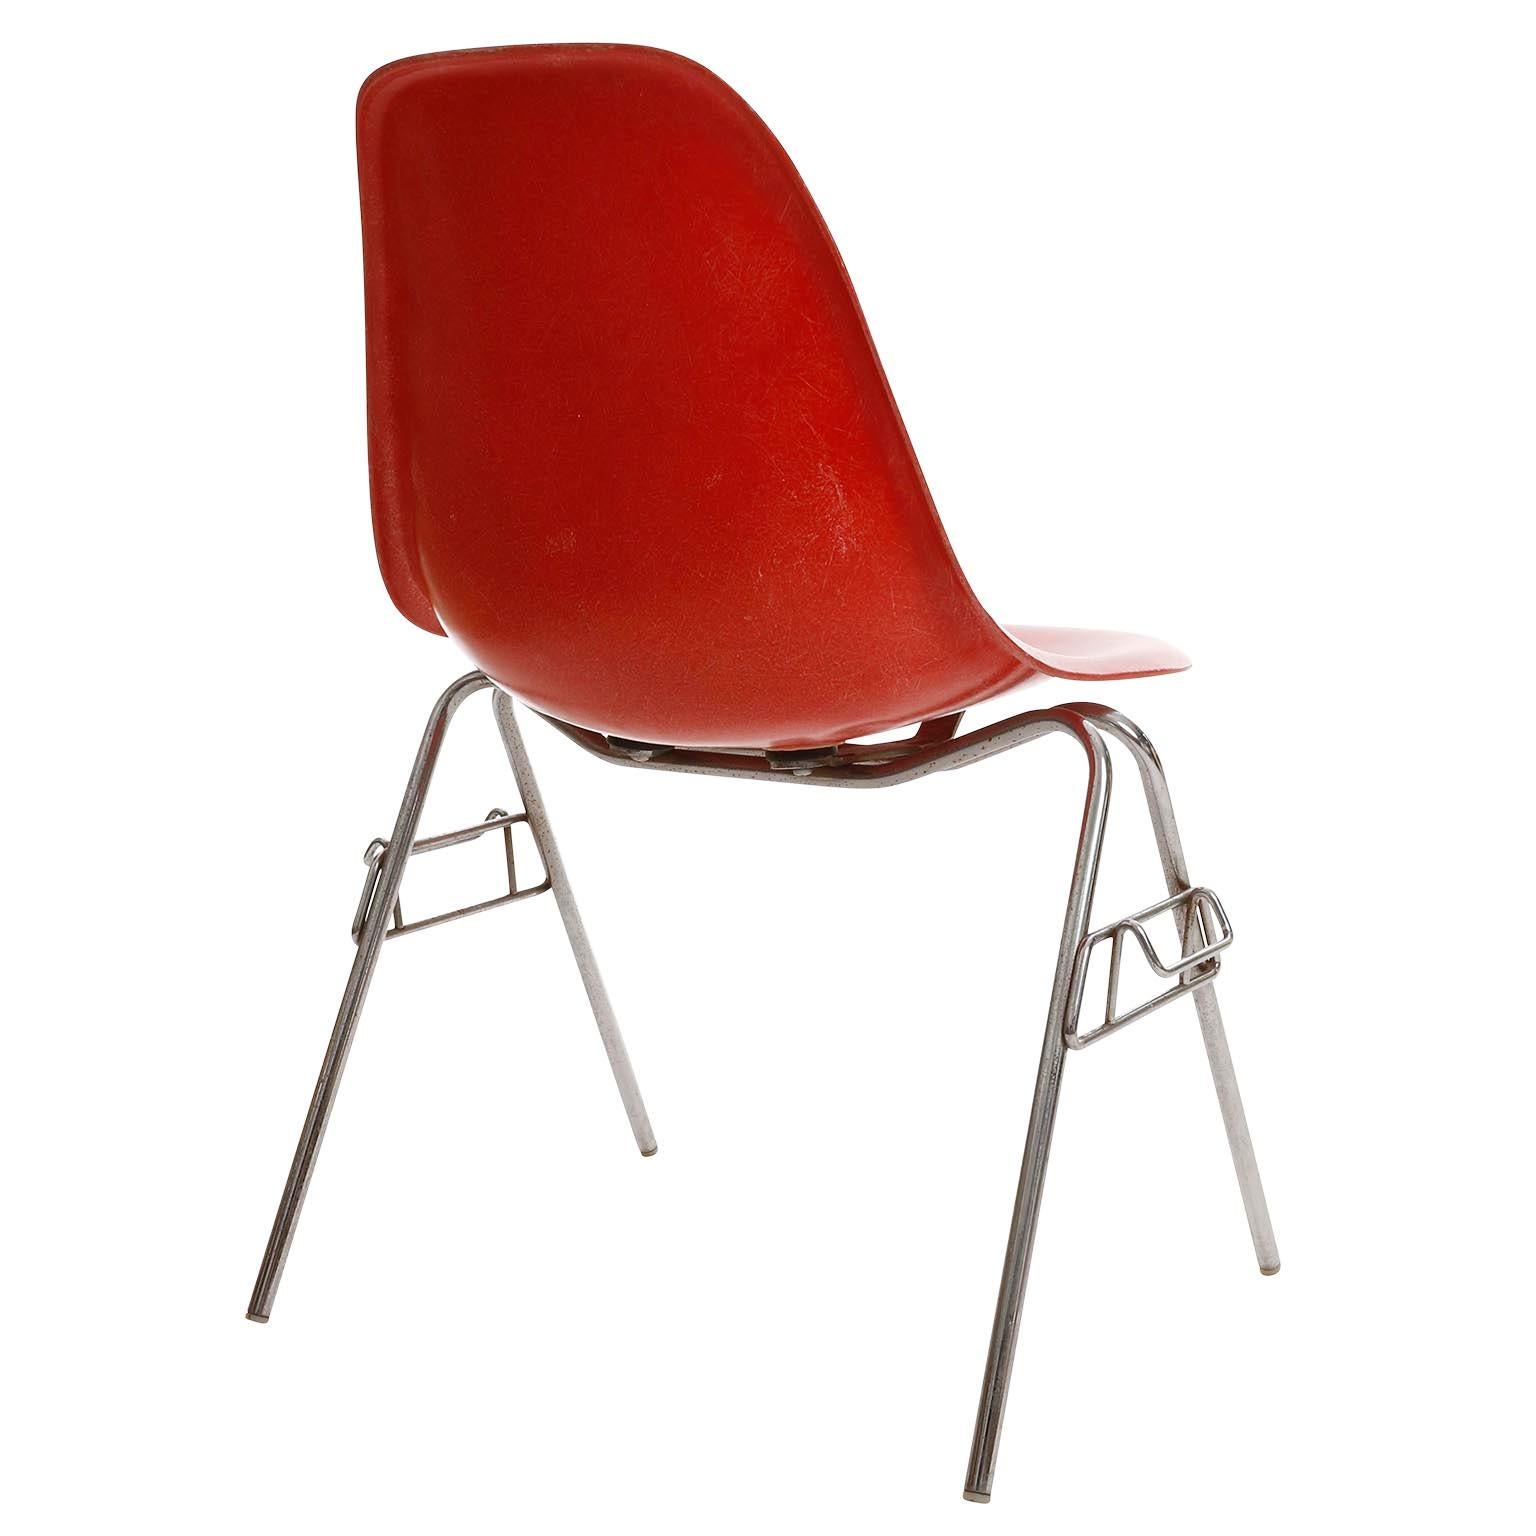 Late 20th Century 22 DSS Stacking Chairs, Charles & Ray Eames, Herman Miller, Red Fiberglass, 1974 For Sale